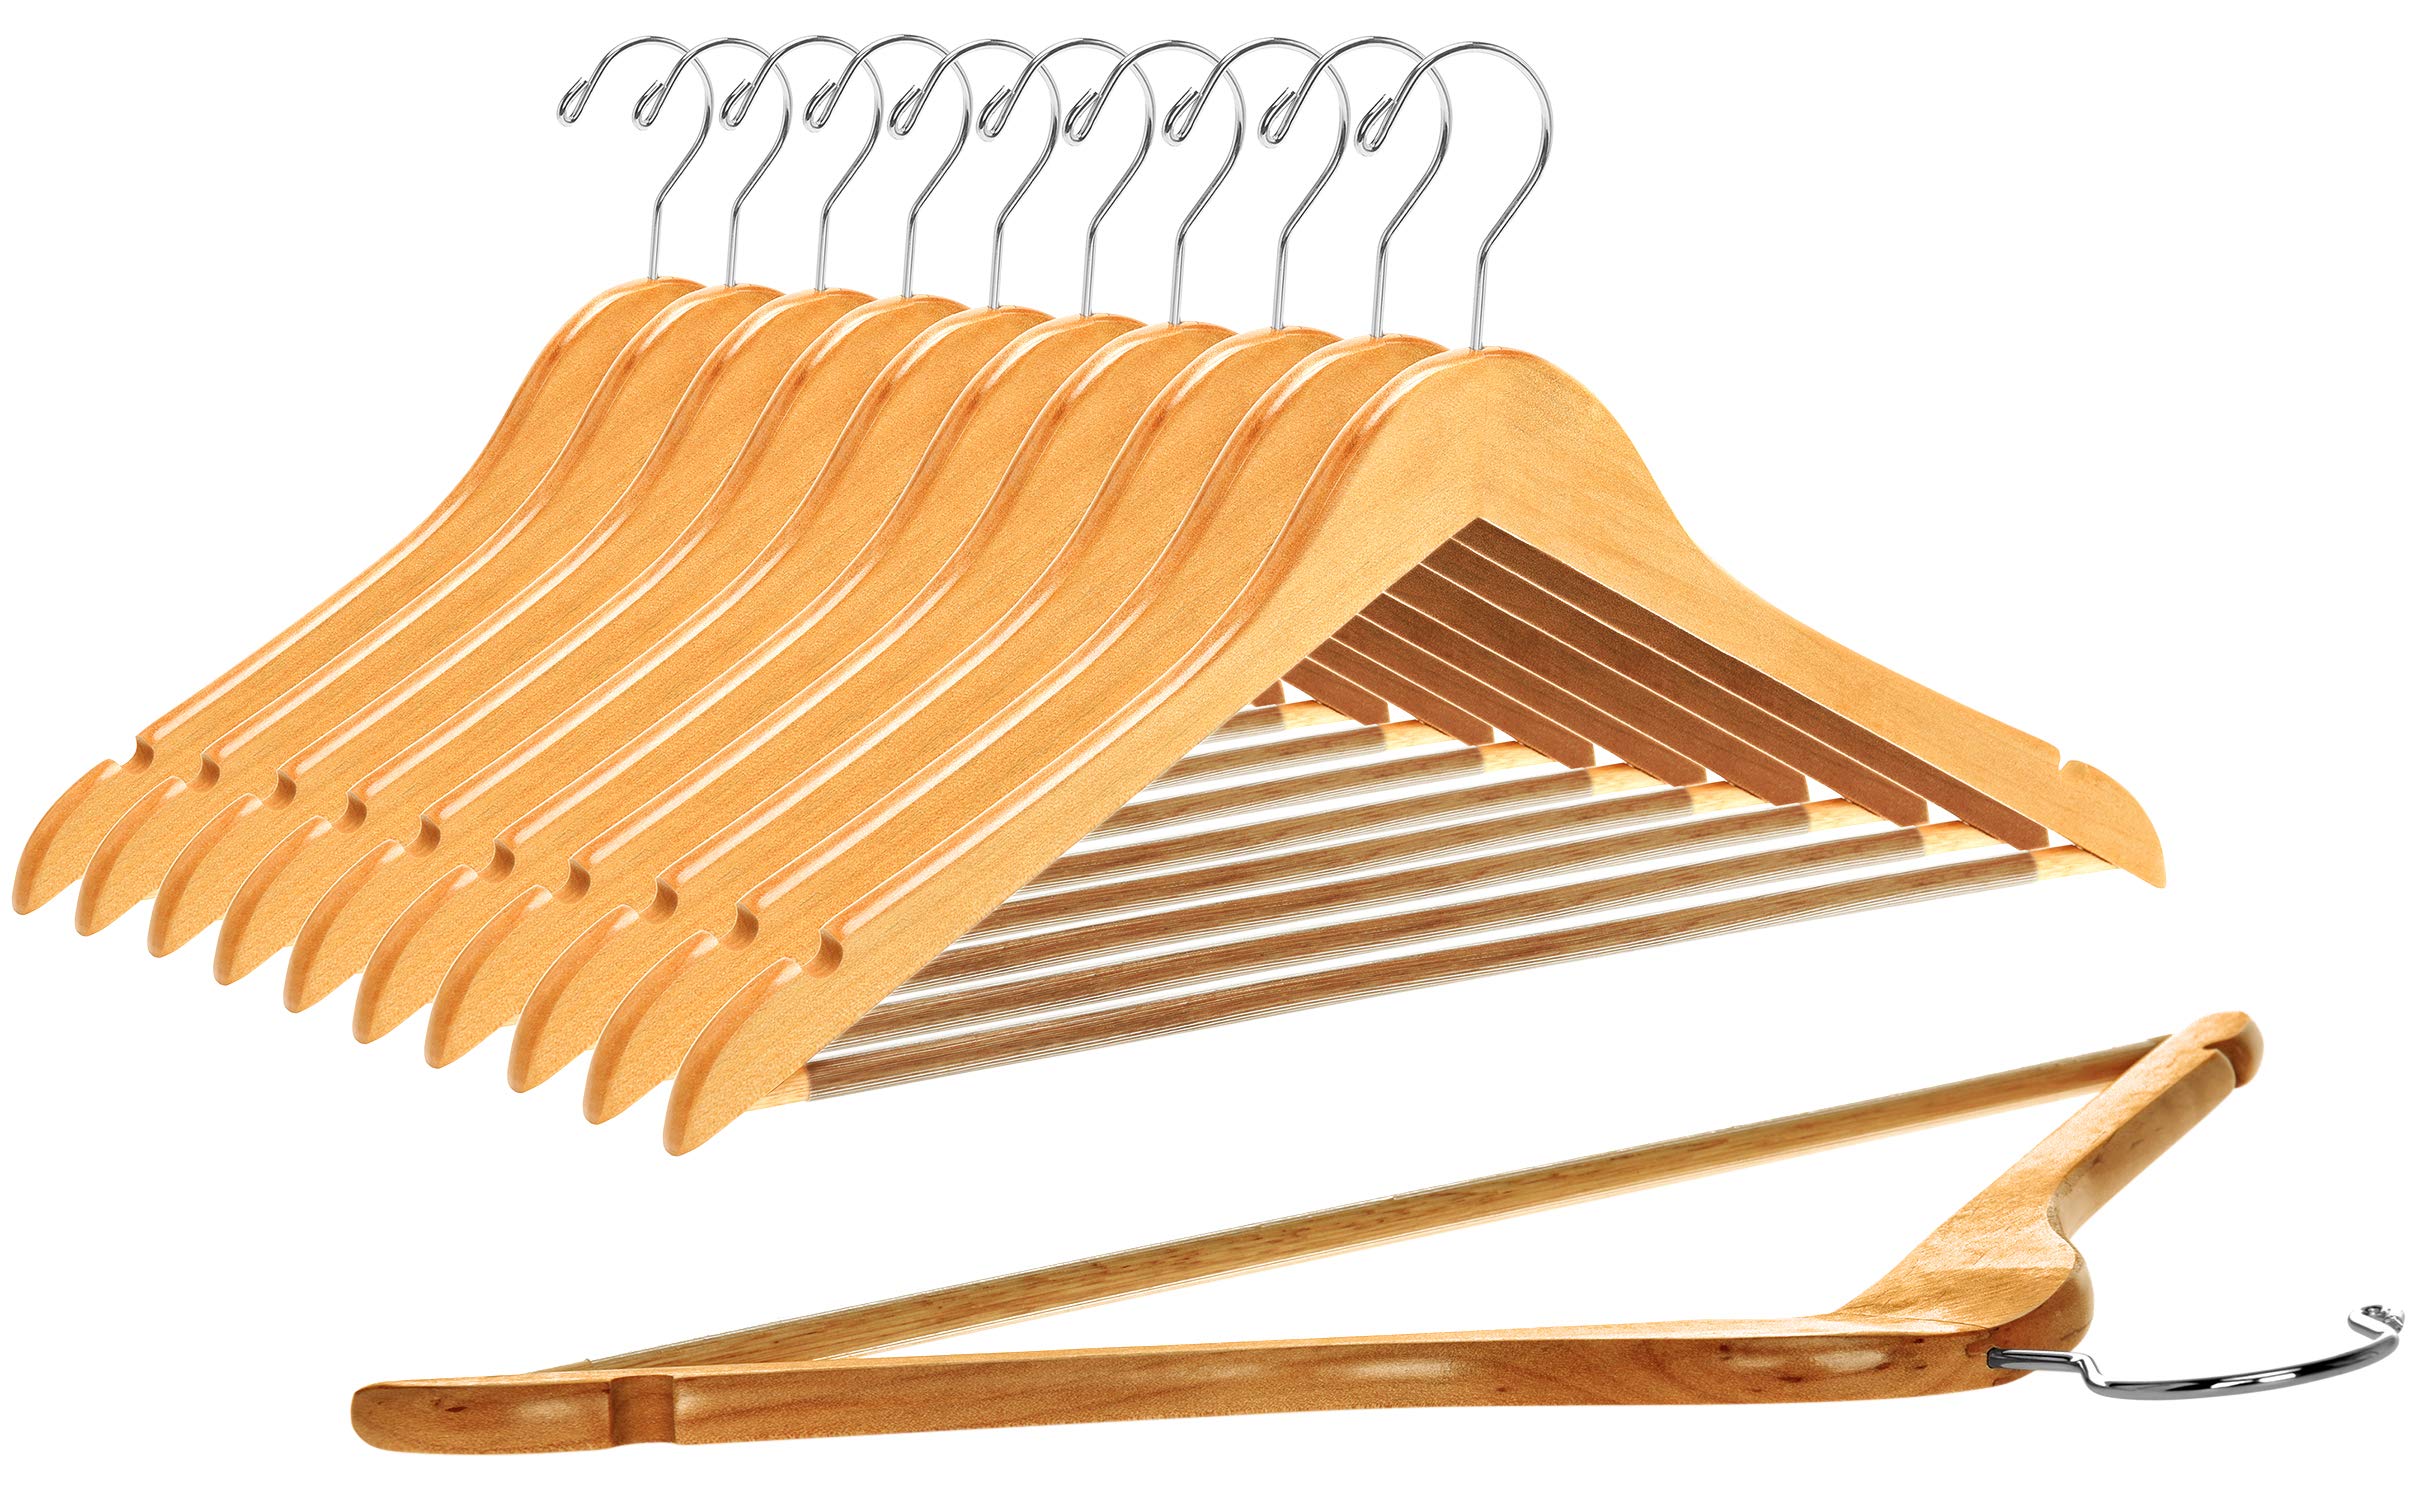 Quality Wooden Hangers - Slightly Curved Hanger Set - Solid Wood Coat Hangers with Stylish Chrome Hooks - Heavy-Duty Clothes, Jacket, Shirt, Pants, Suit Hangers (Natural, 10)  - Like New